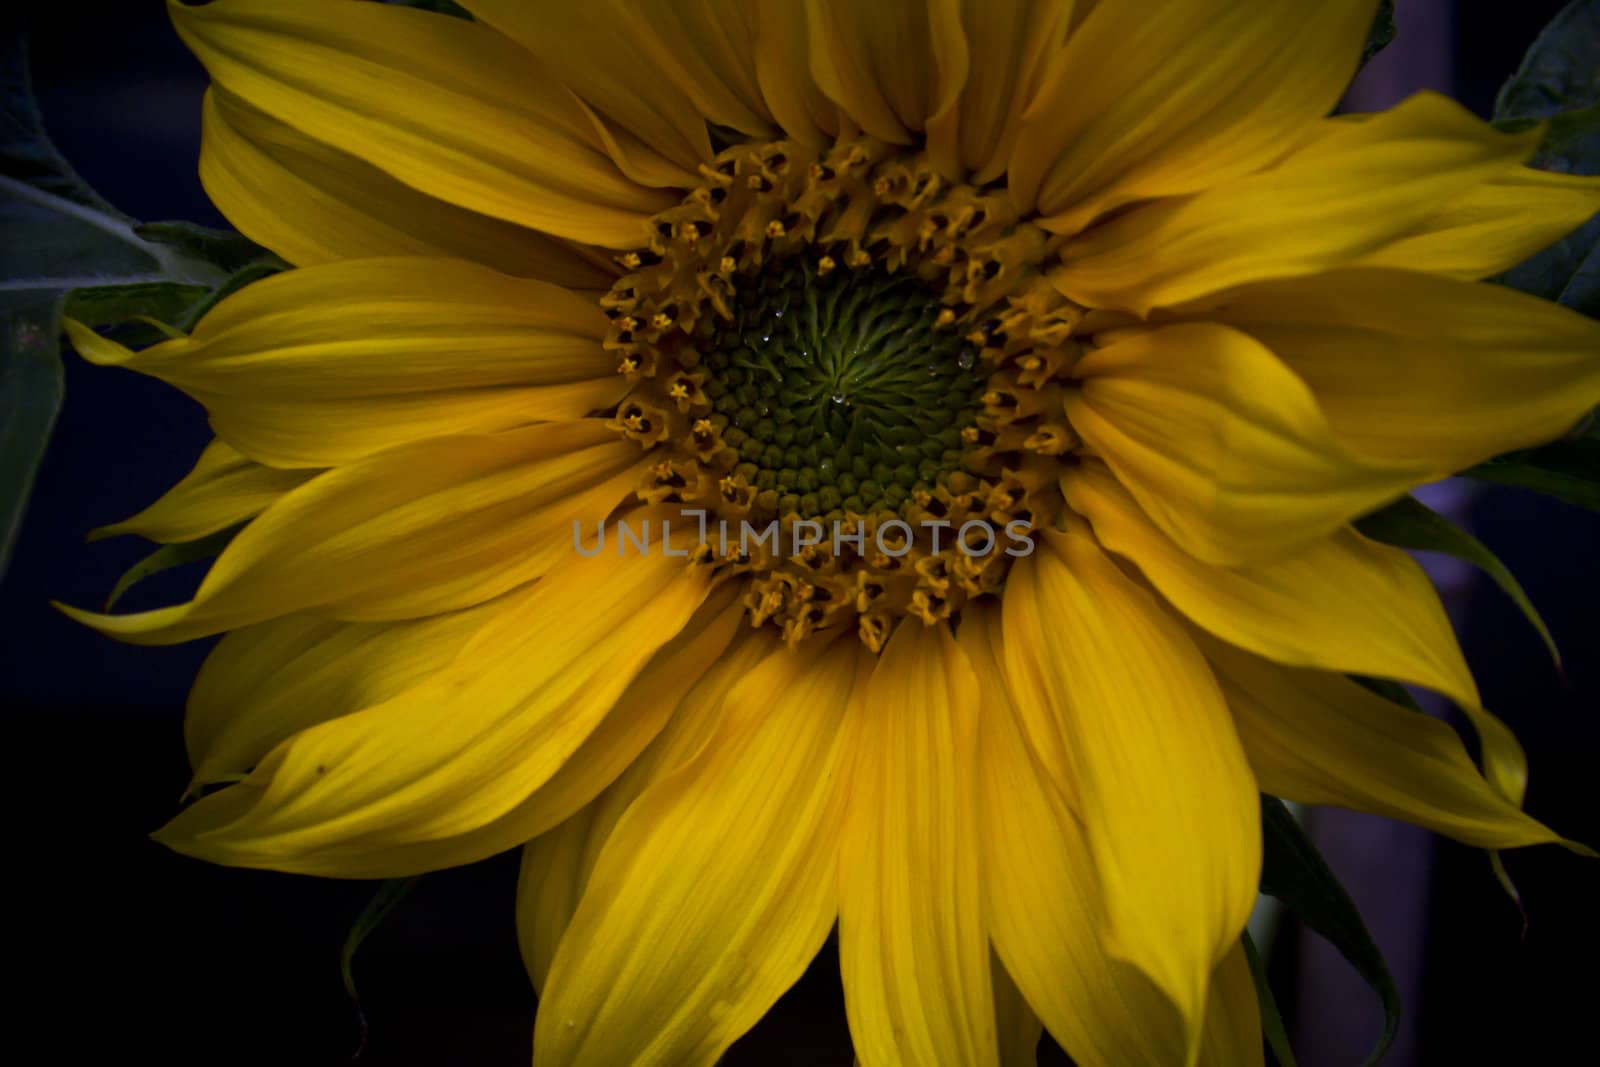 It's big and bold and absolutely gorgeous, the lovely goldon yellow sunflower